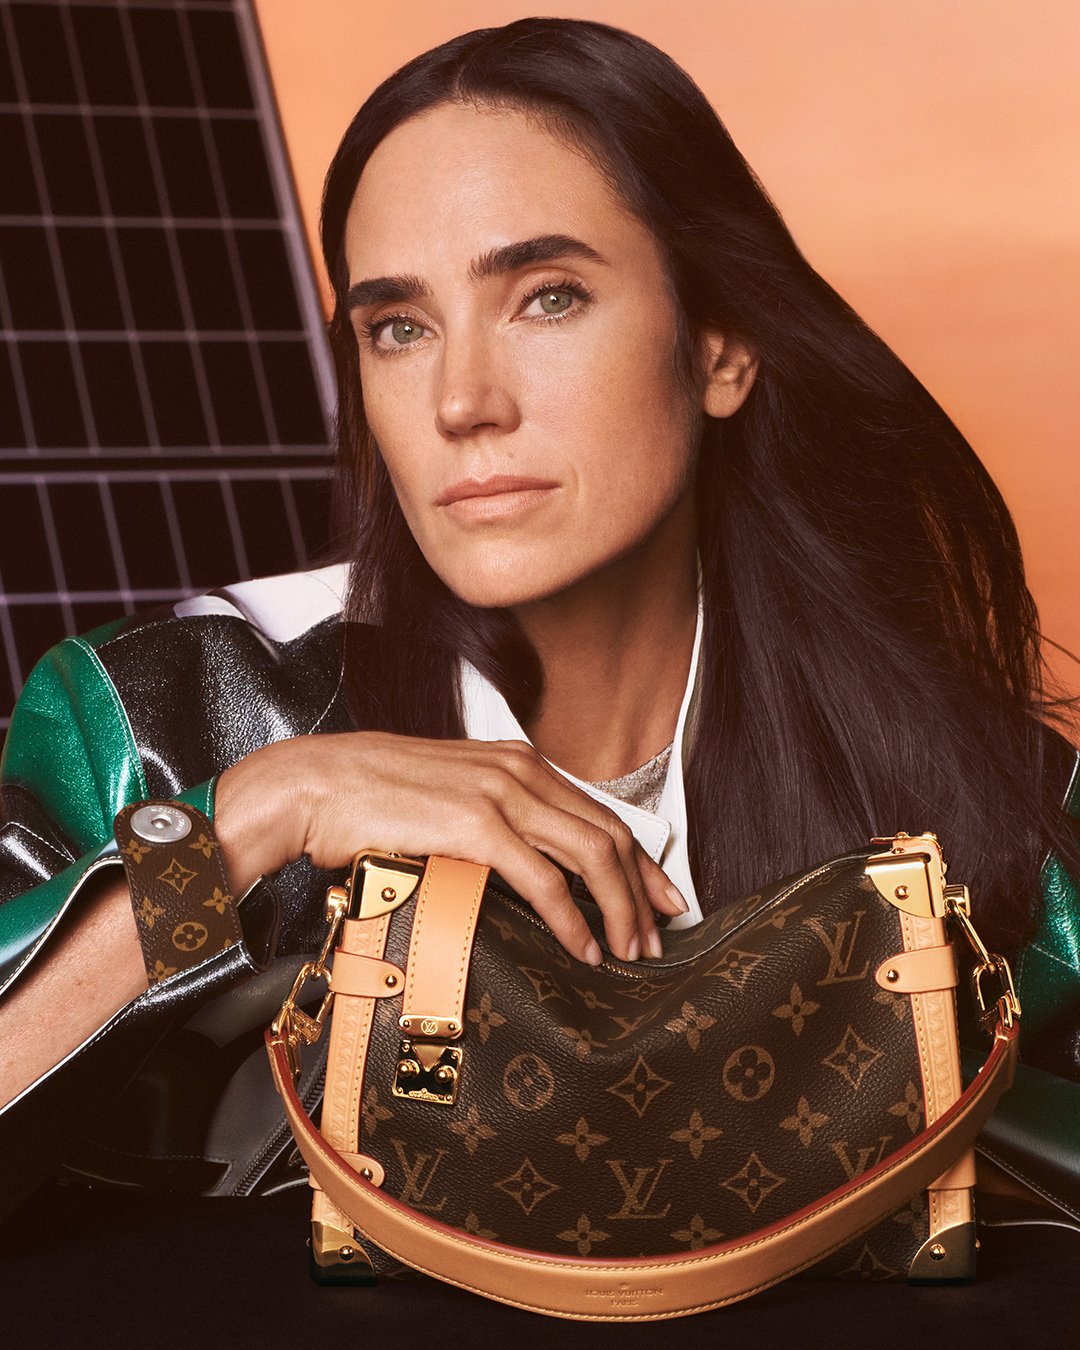 poster advertising Louis Vuitton handbag with Jennifer Connelly in